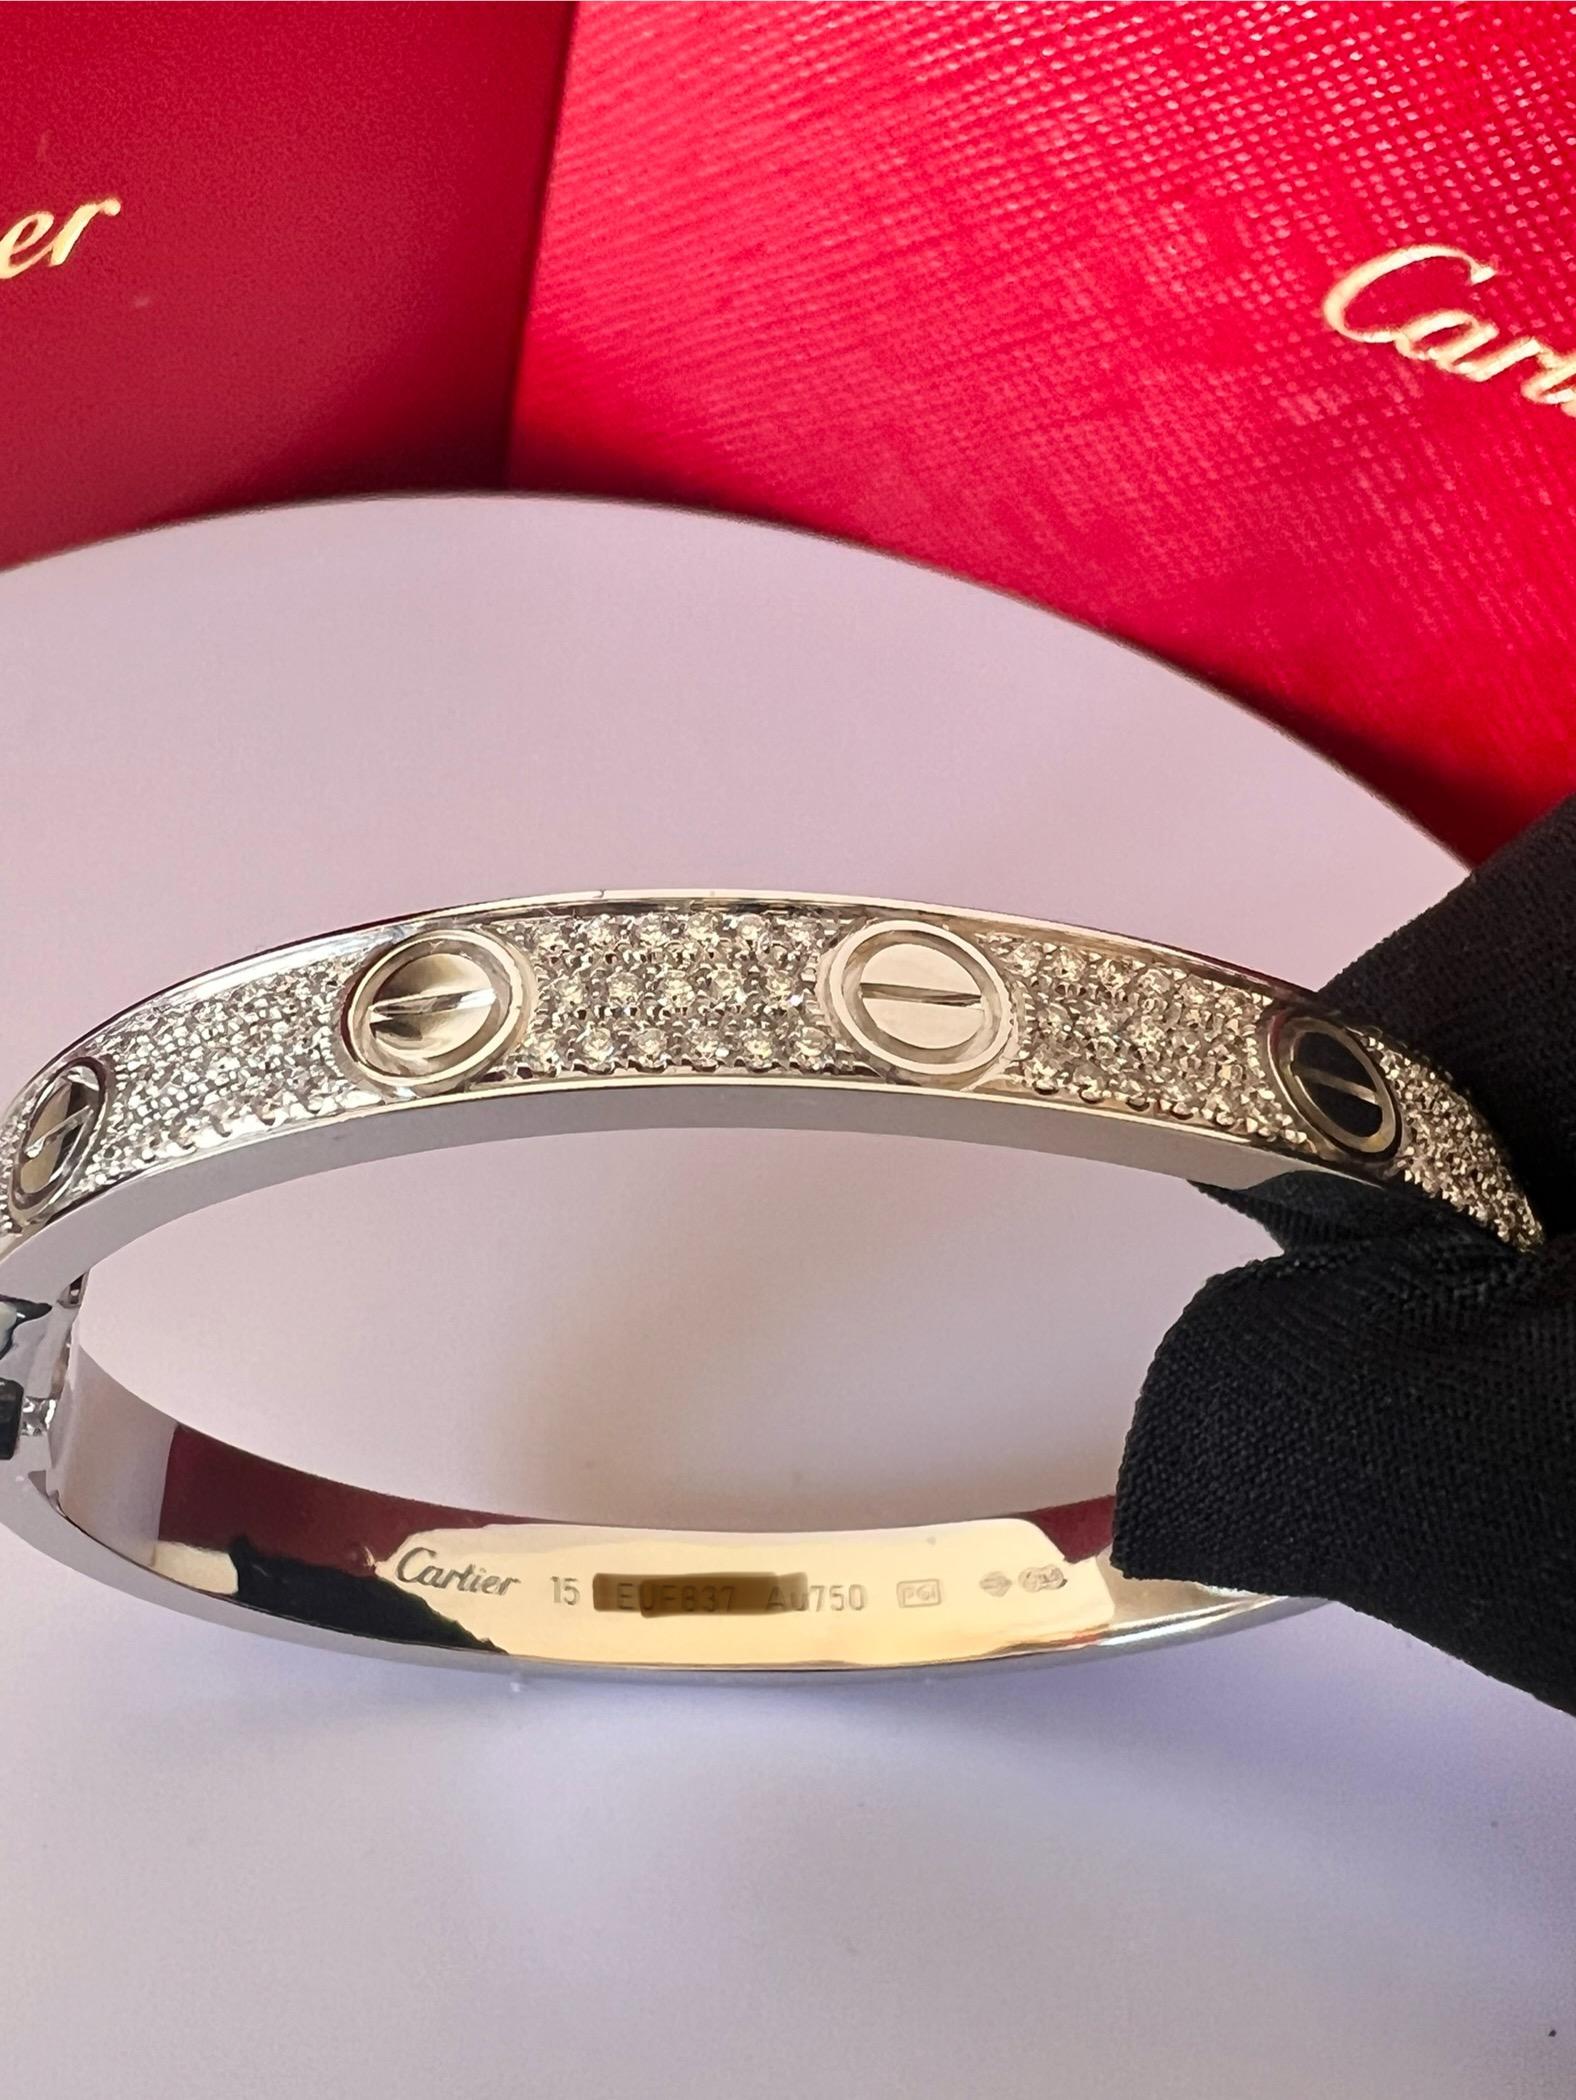 CARTIER LOVE BRACELET
Cartier 'Love' bangle bracelet crafted in 18 karat white gold with diamond screw tops and pave set round brilliant cut diamonds (D-F in color, VVS clarity)
Signed Cartier, 750, with serial number and hallmarks 
The bracelet is